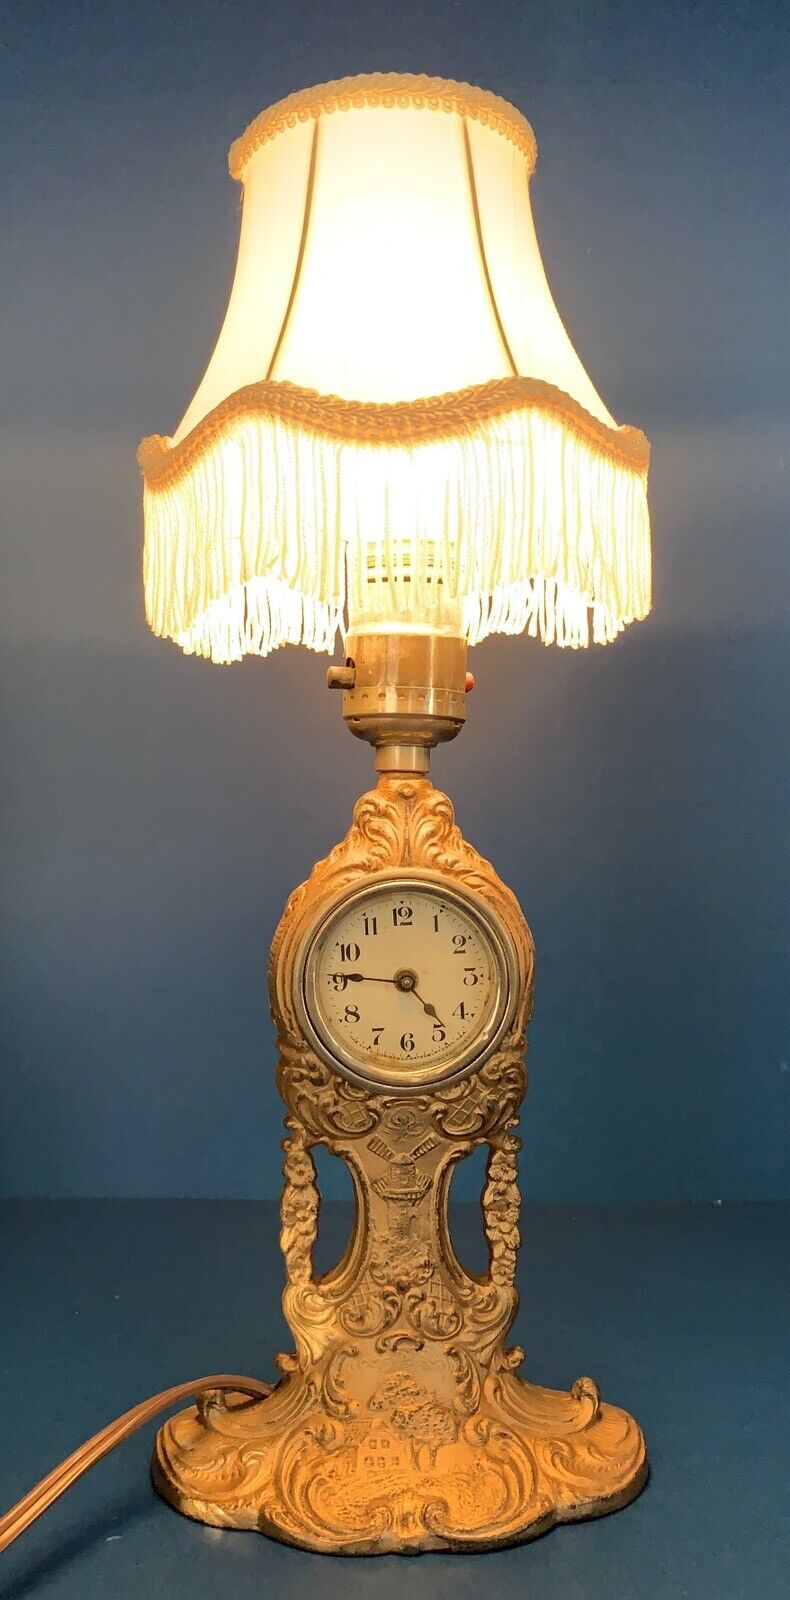 ANTIQUE-LUX CLOCK MFG.Co.-CLOCK-LAMP-Circa-1925-WORKING CONDITION-GOLD SPELTER